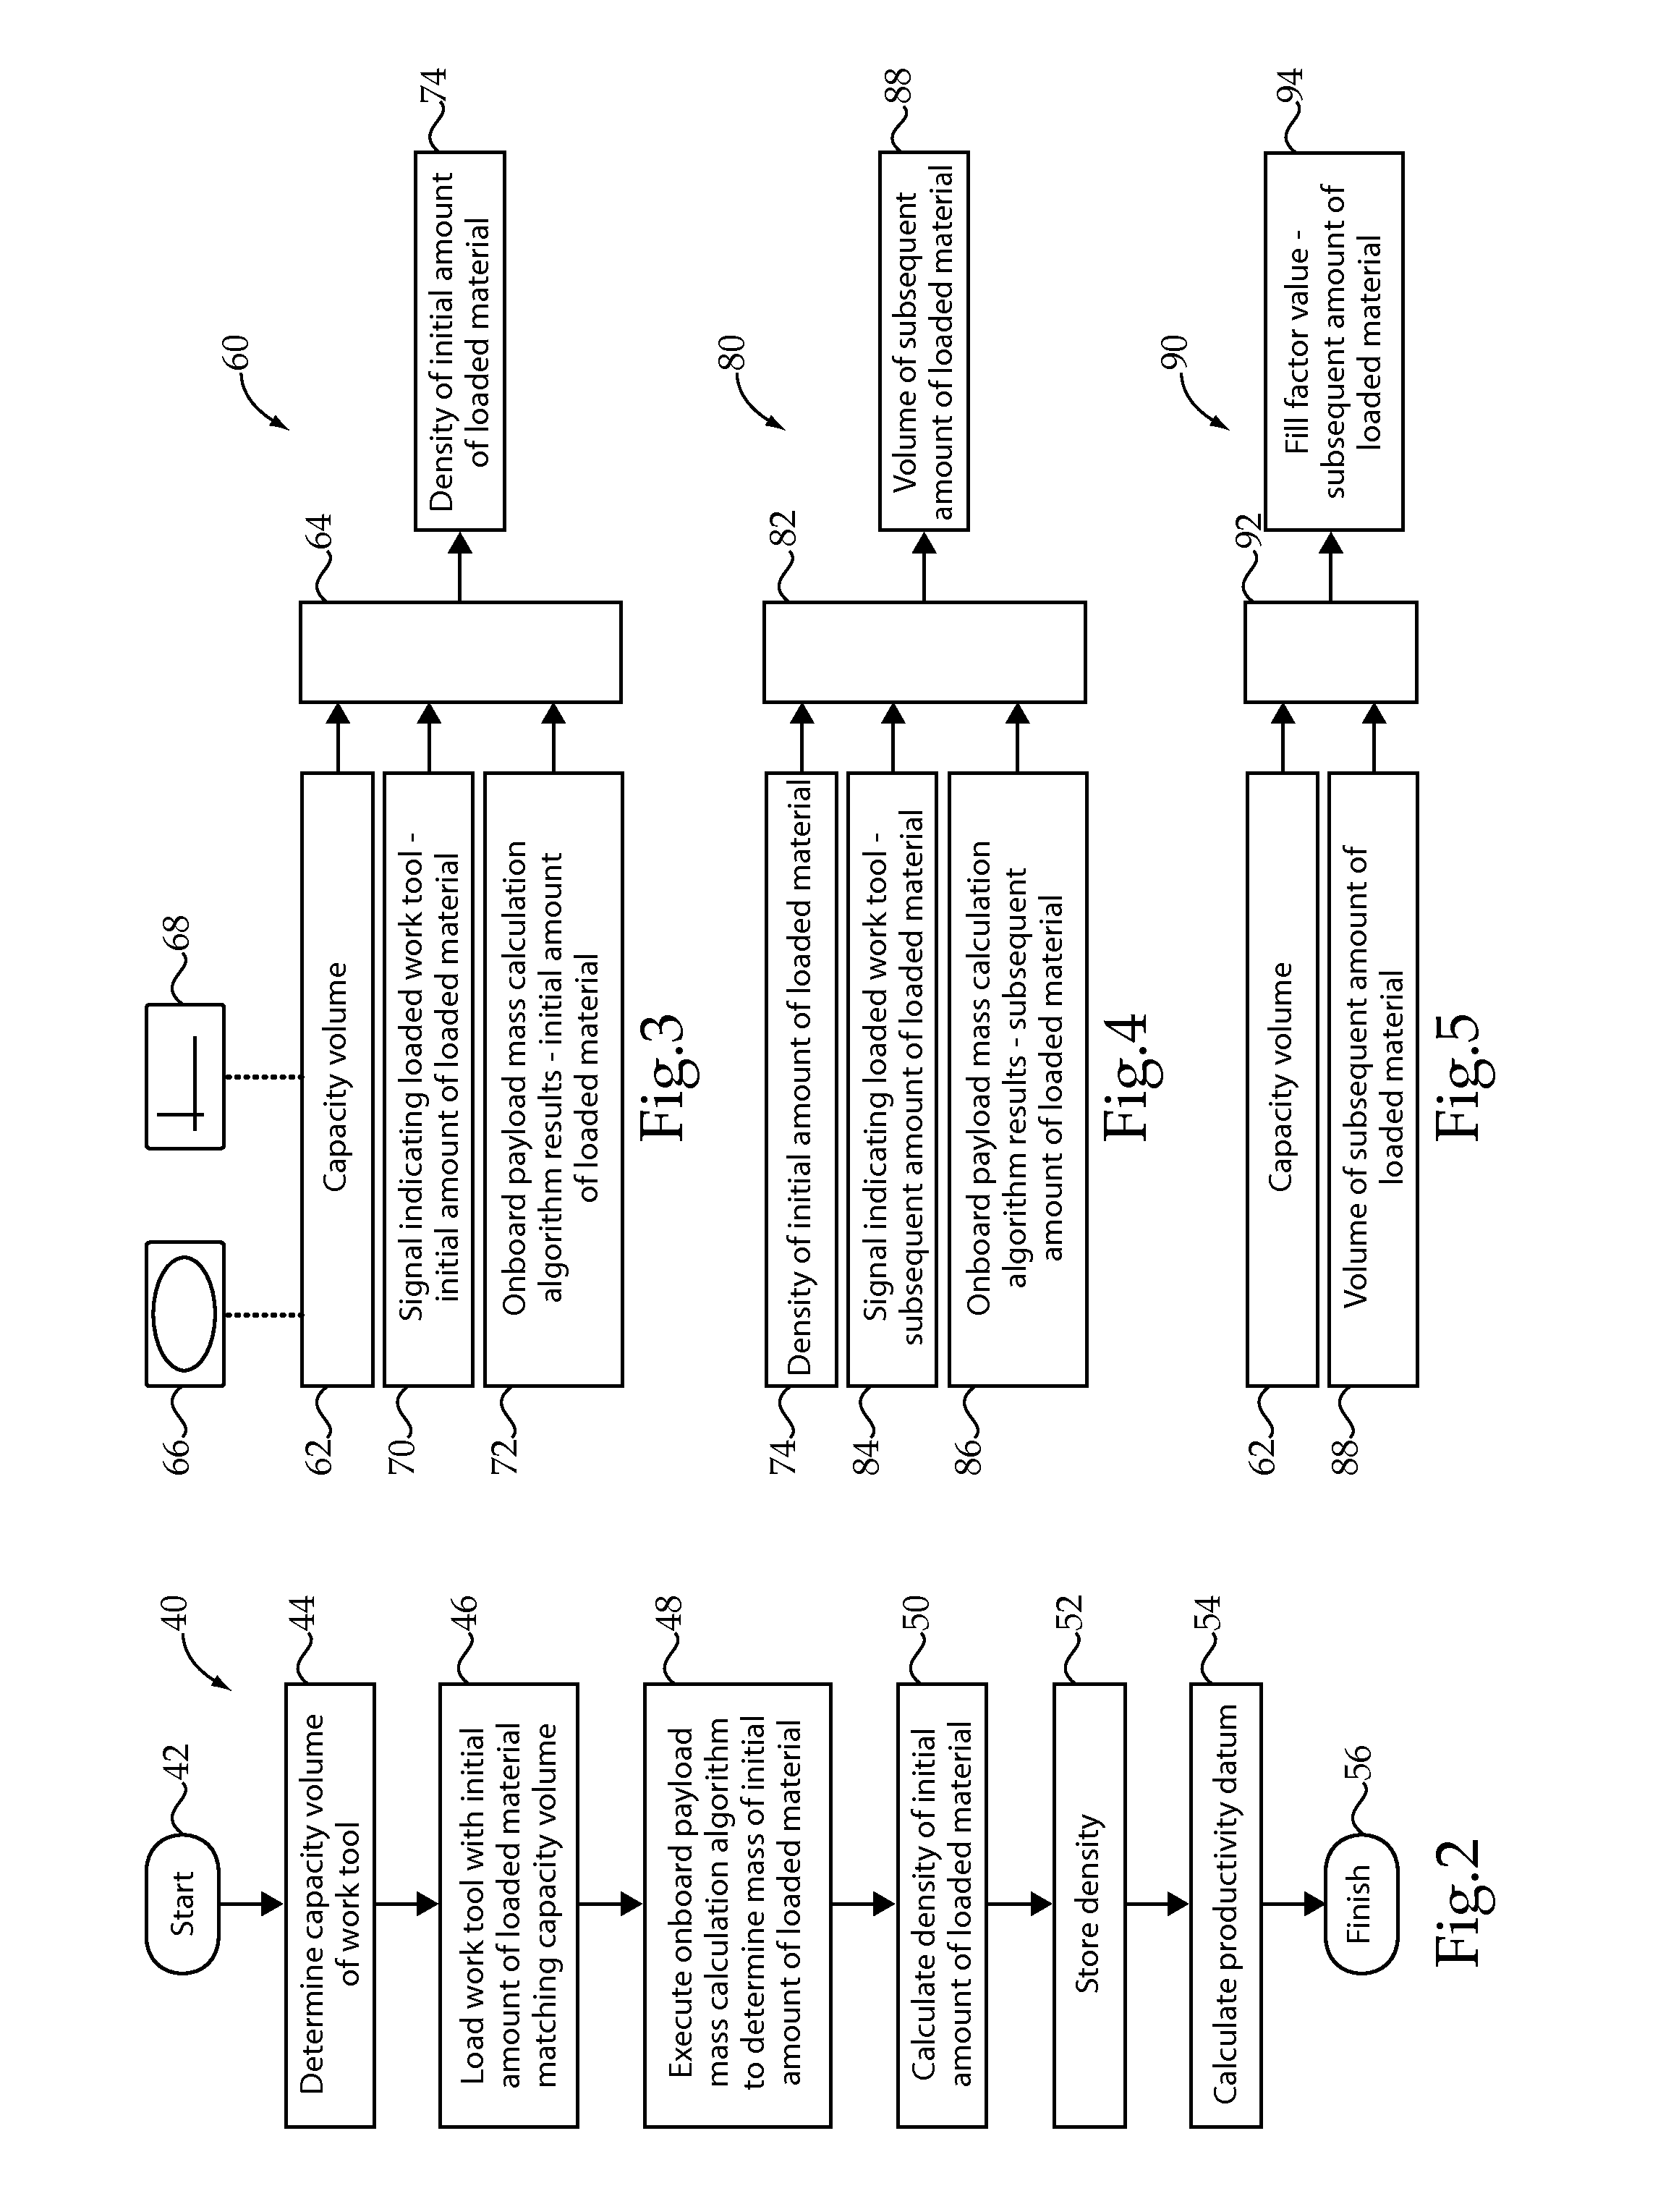 Payload material density calculation and machine using same